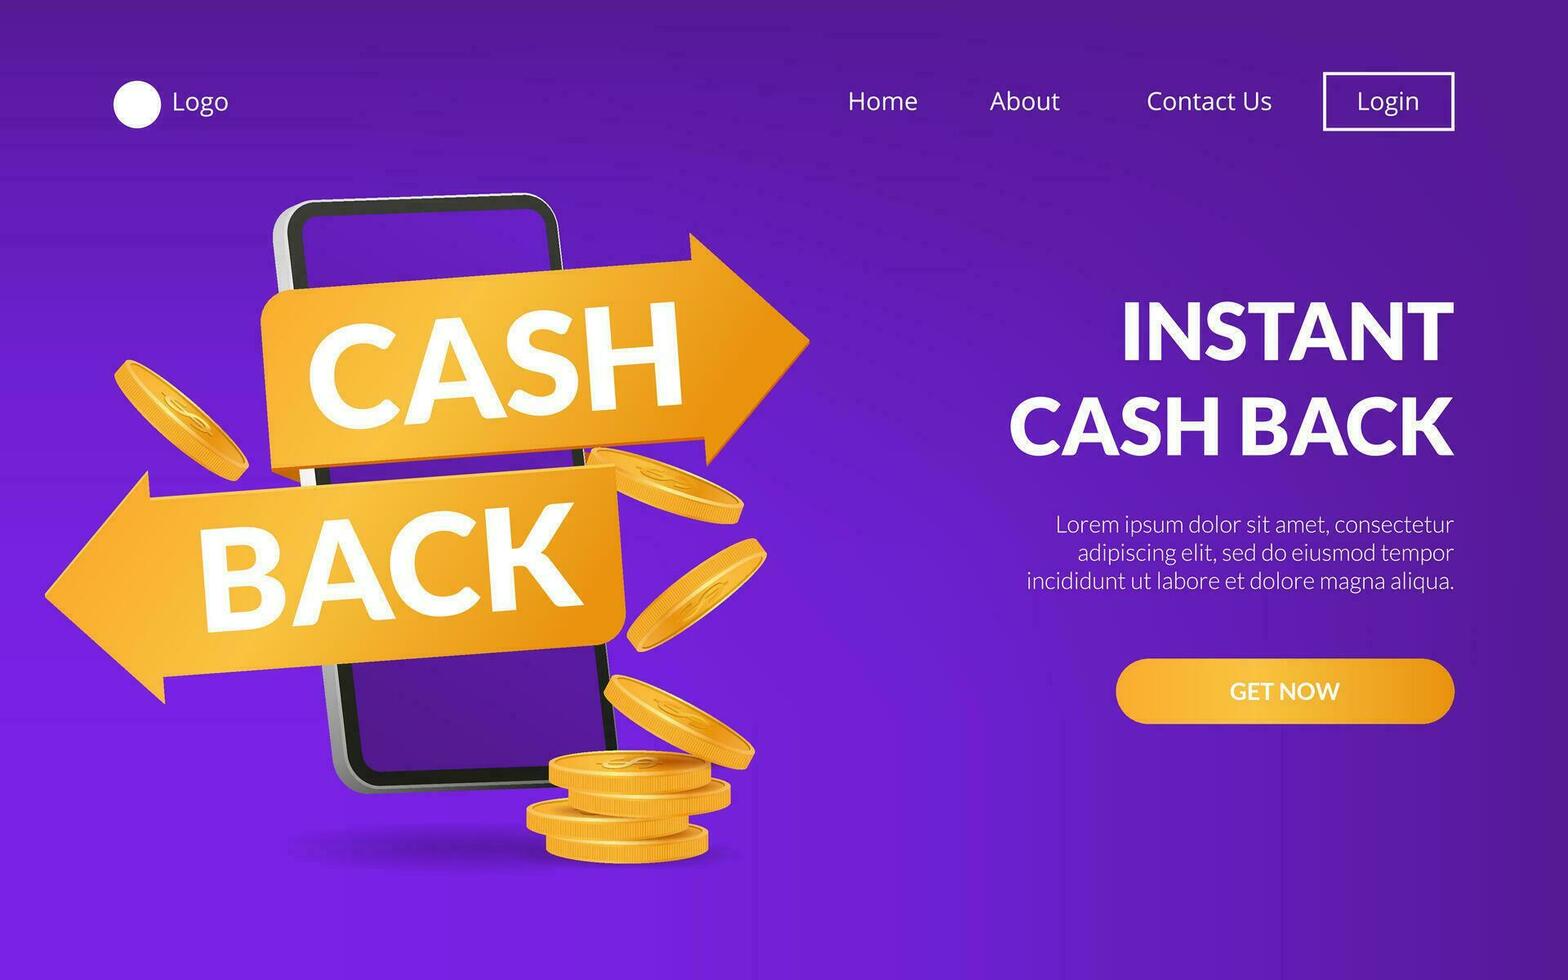 3D vector image with a golden cashback symbol, representing instant cashback satisfaction. Perfect for banners, promotions, and retail businesses. Features a pile of golden coins